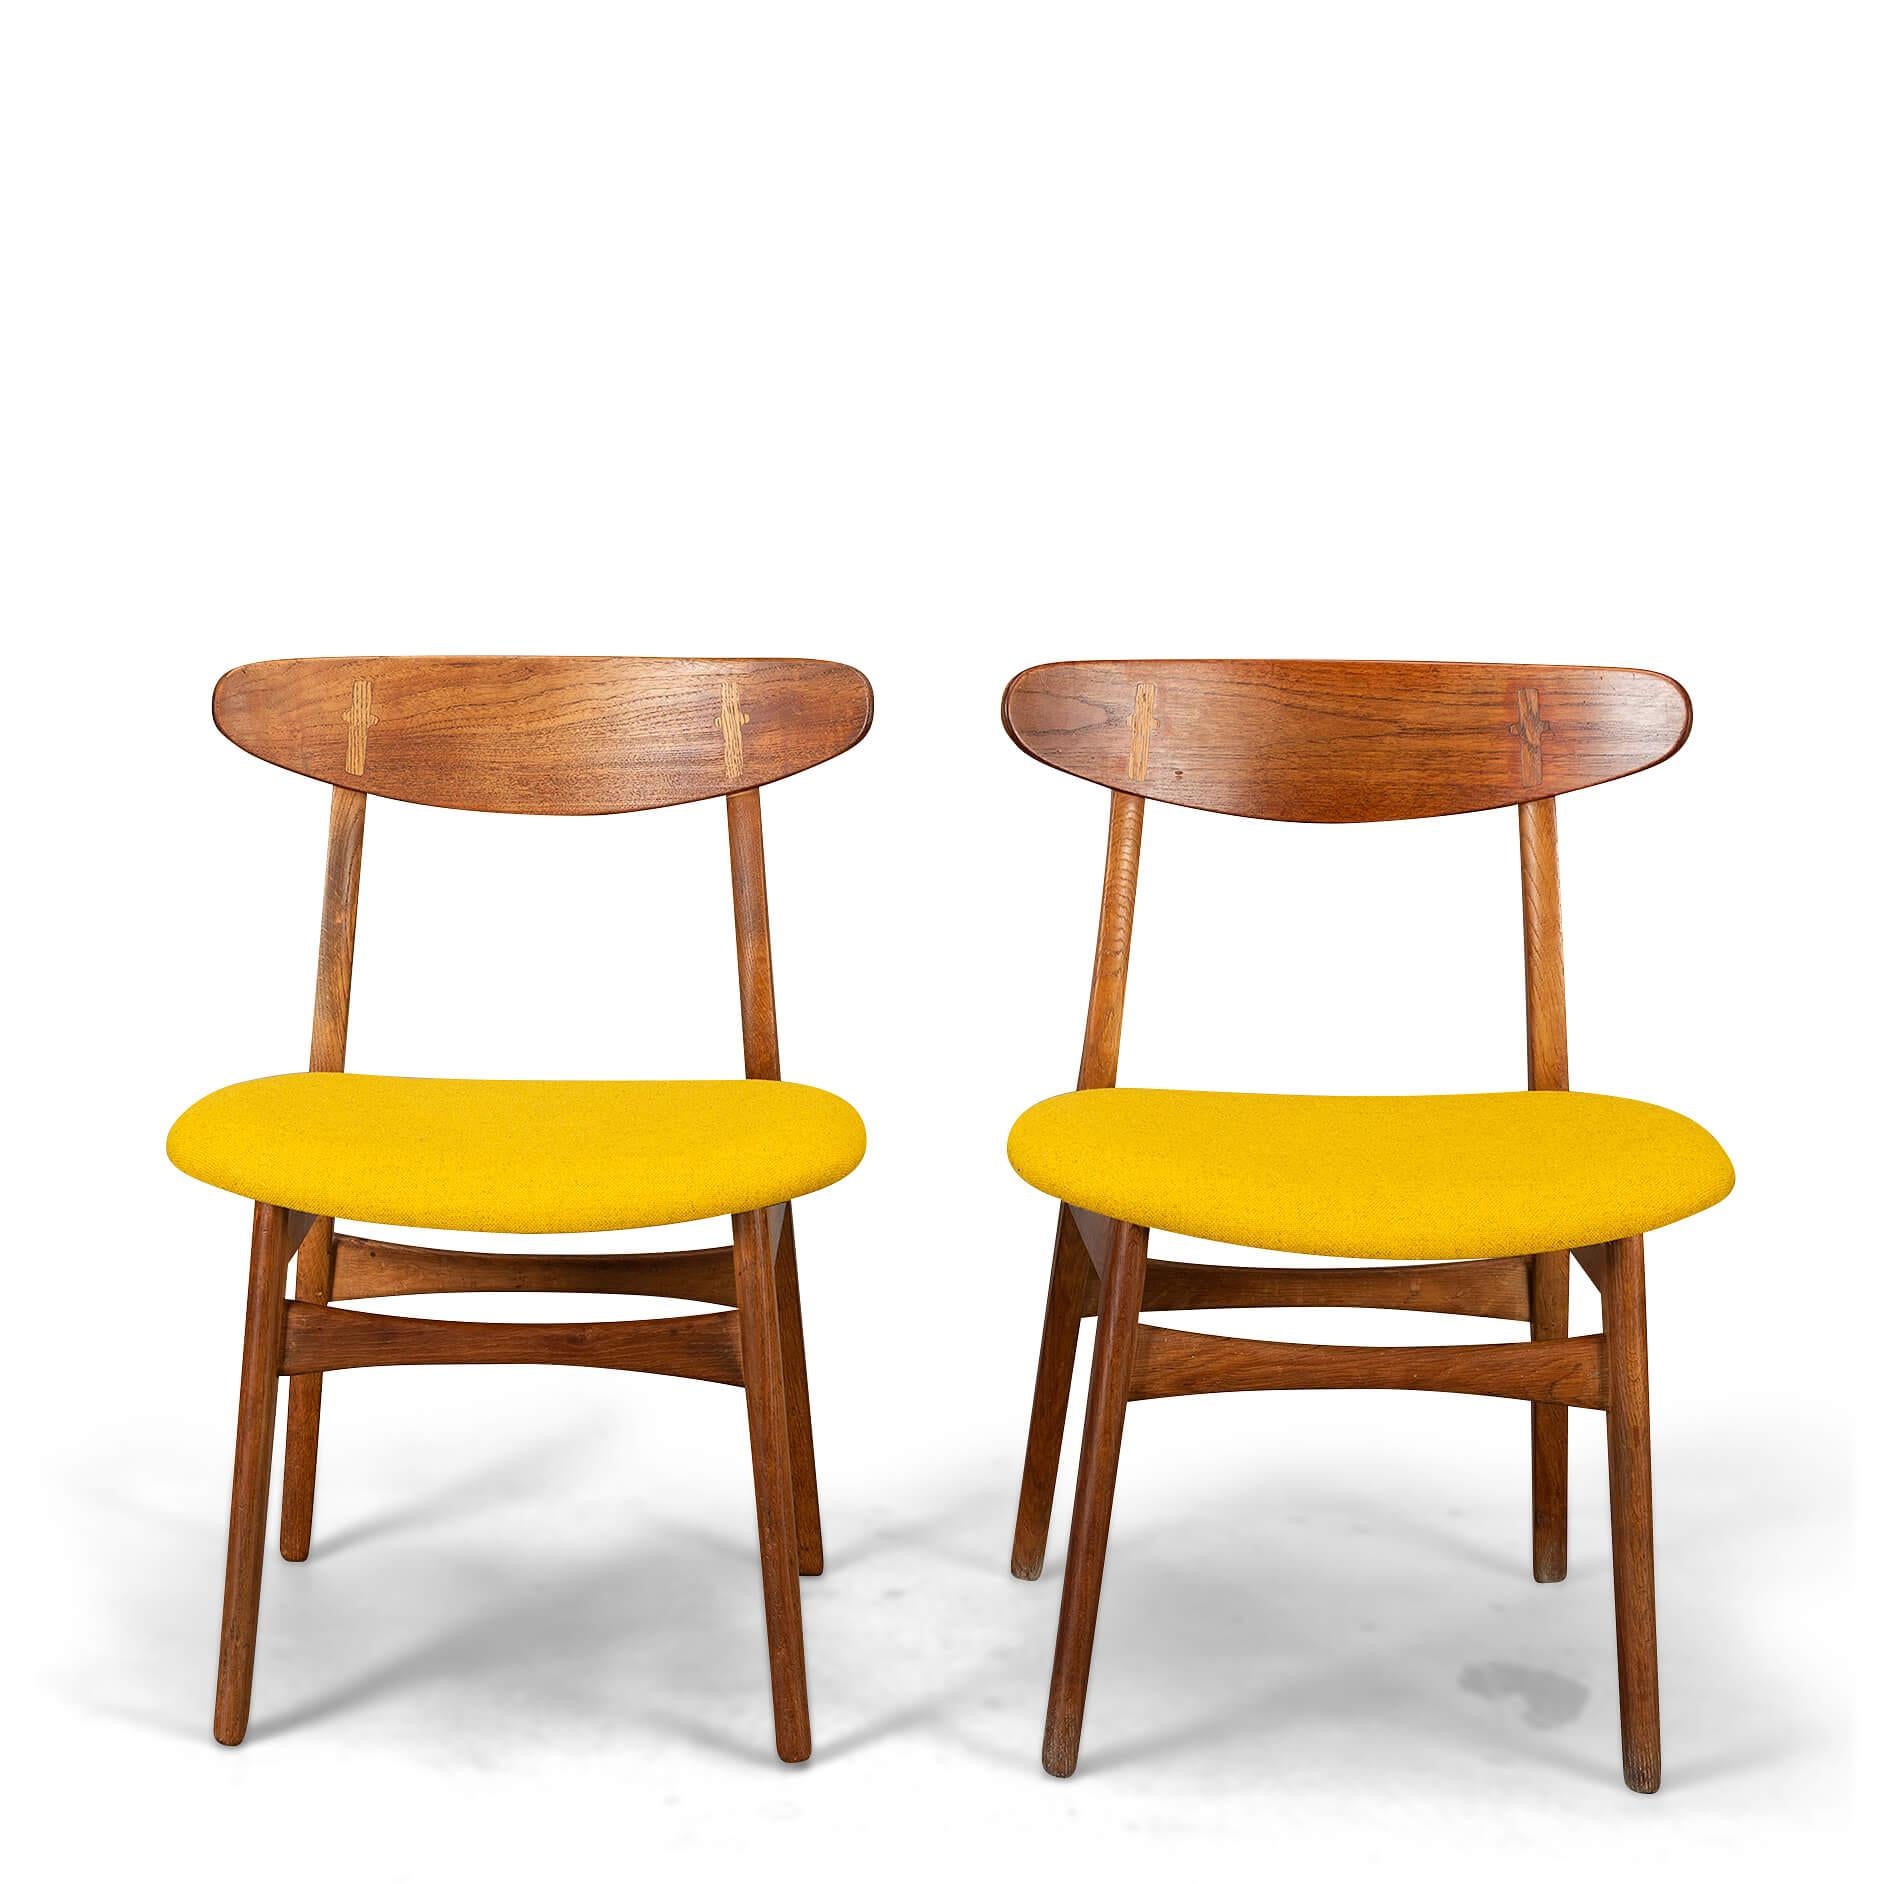 Mid-20th Century Reupholstered Chair #CH30 by Hans J. Wegner for Carl Hansen & Son, Set of 2